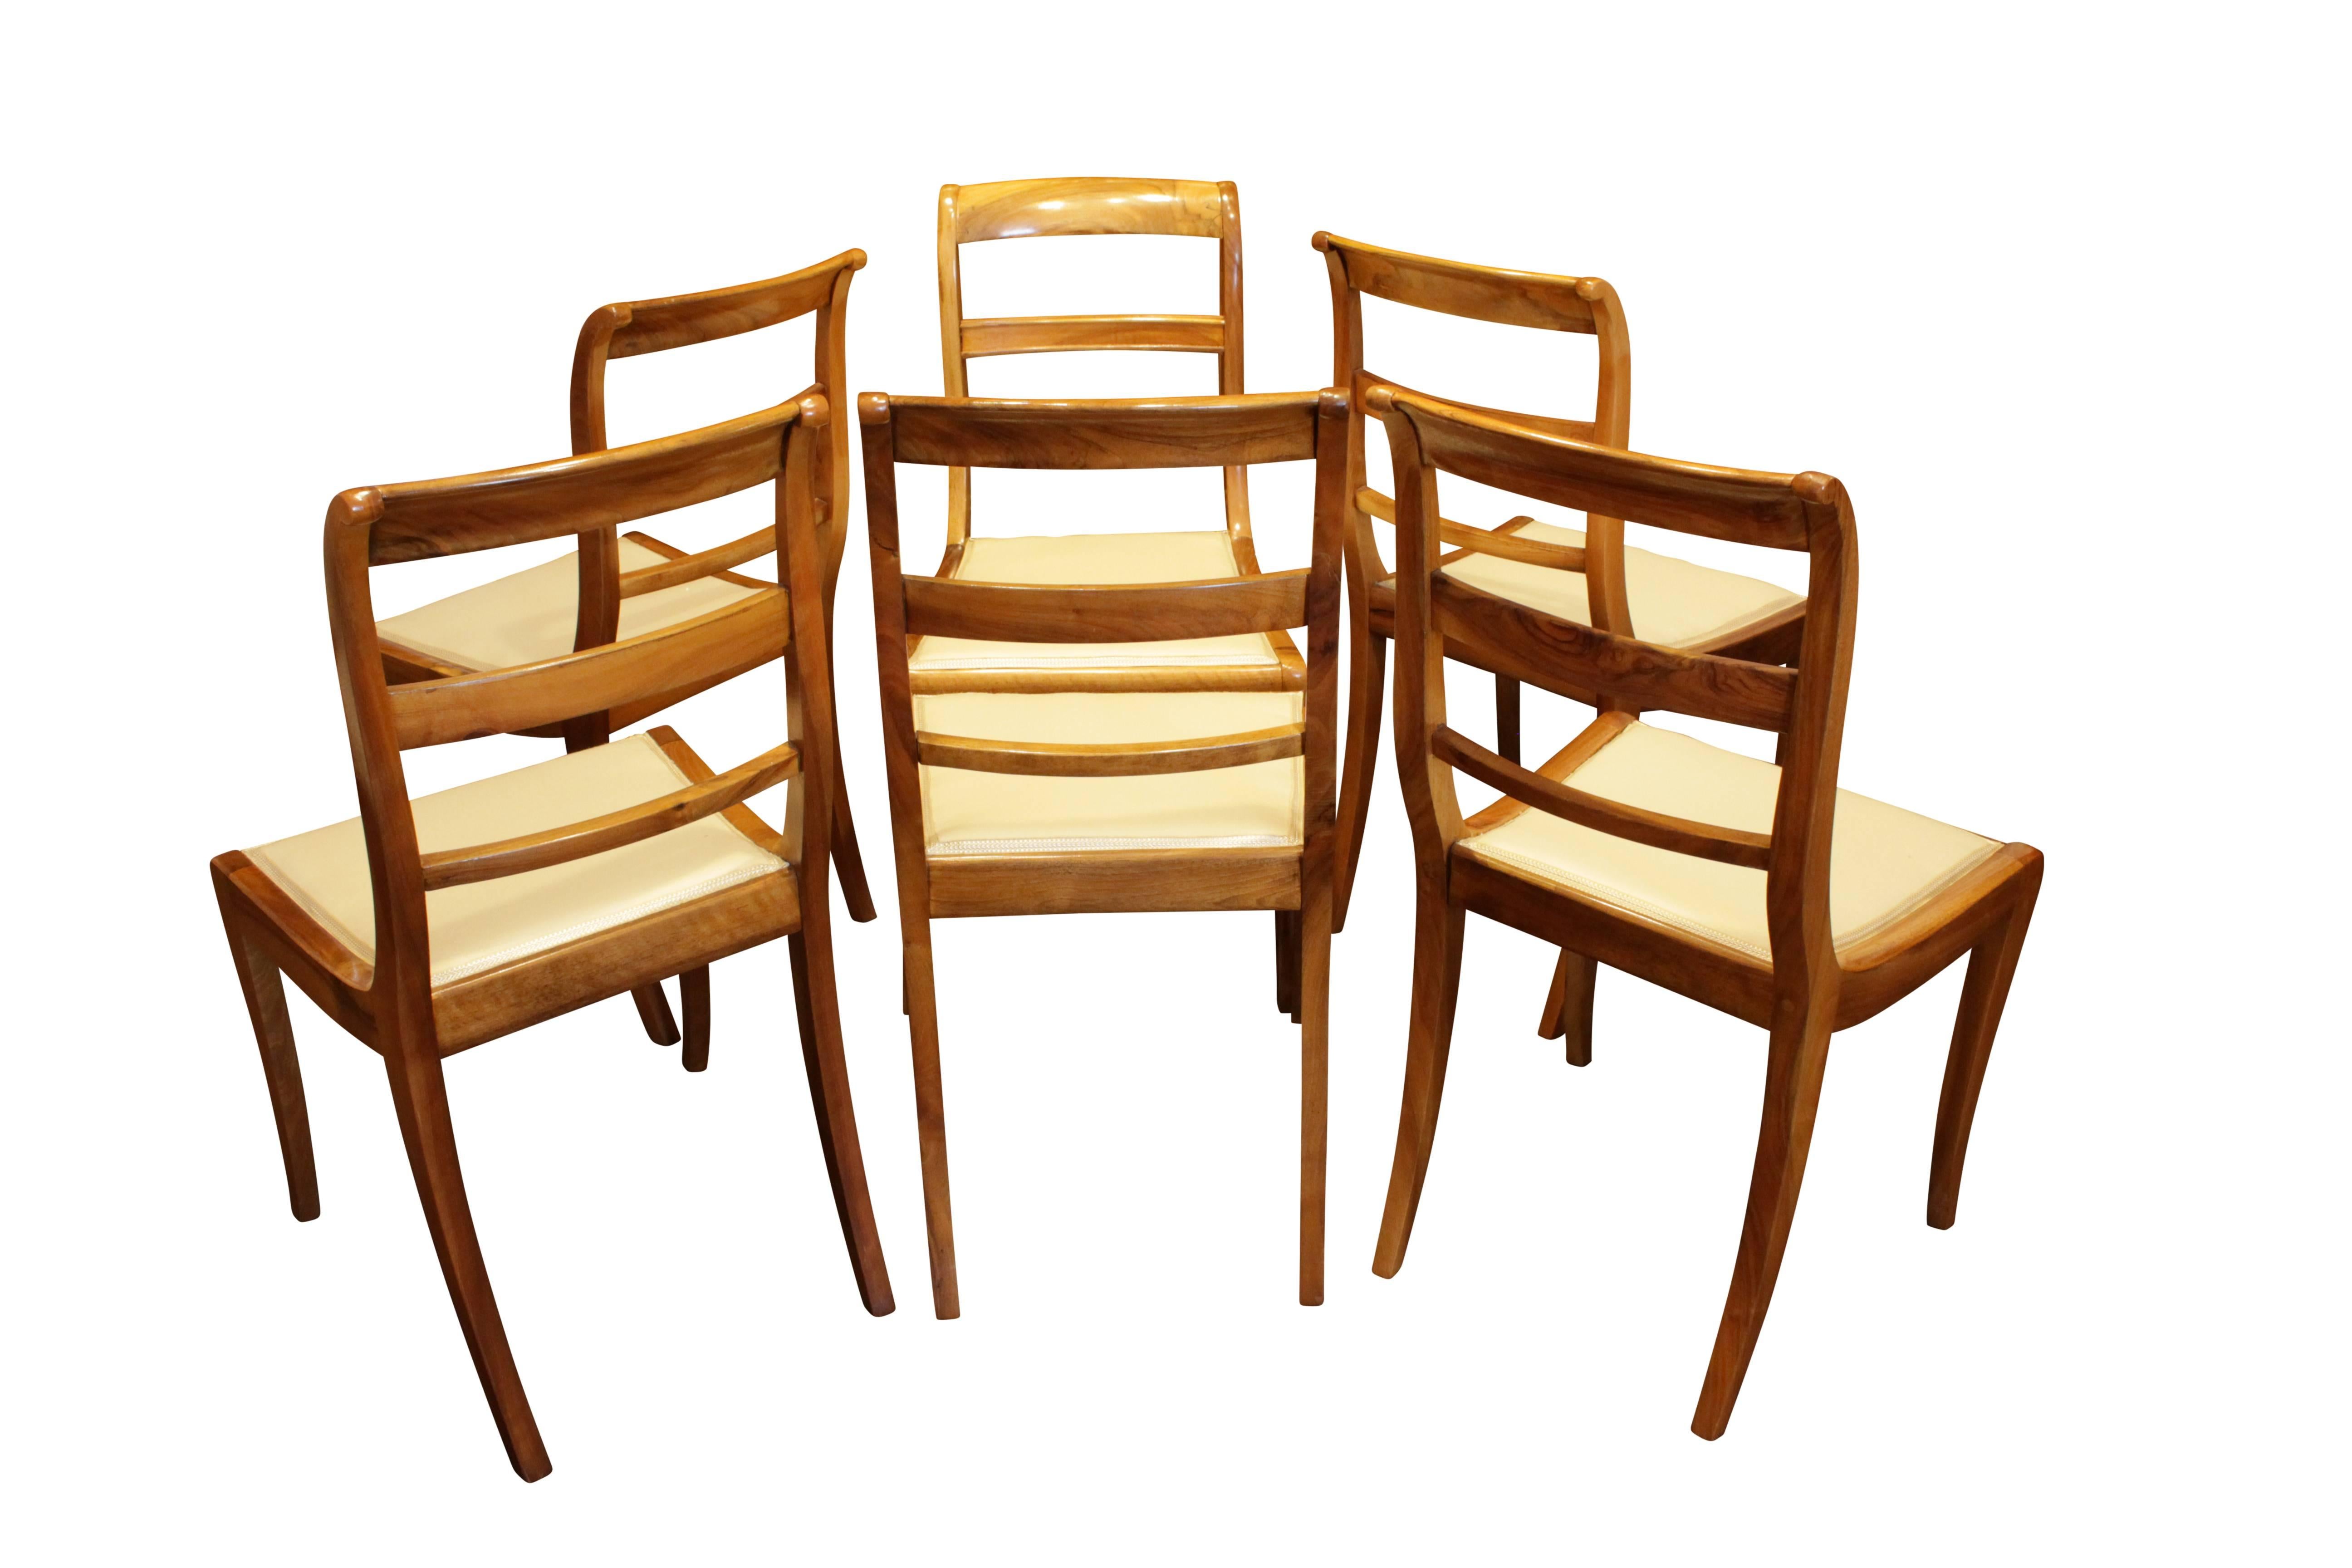 Polished 19th Century, Set of Six Solid Walnut Biedermeier Chairs from Germany